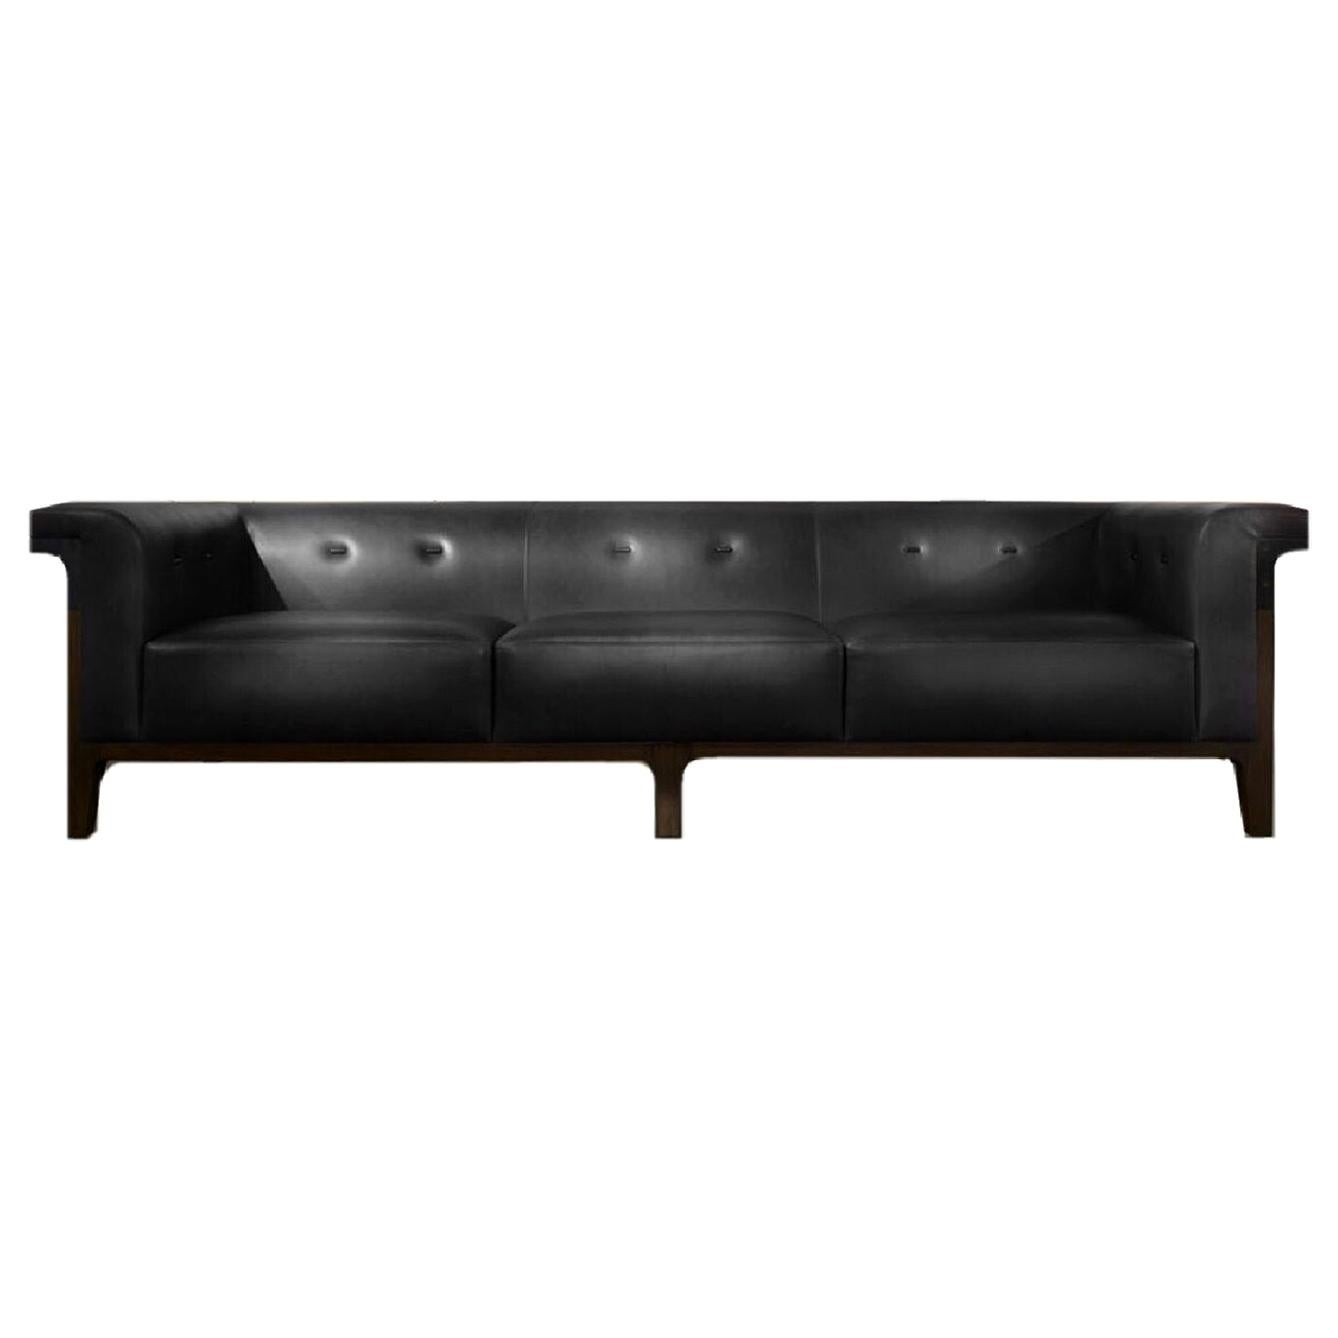 Hadrian Leather Sofa by Jean-Michel Wilmotte for Holly Hunt, 2010, French Gray